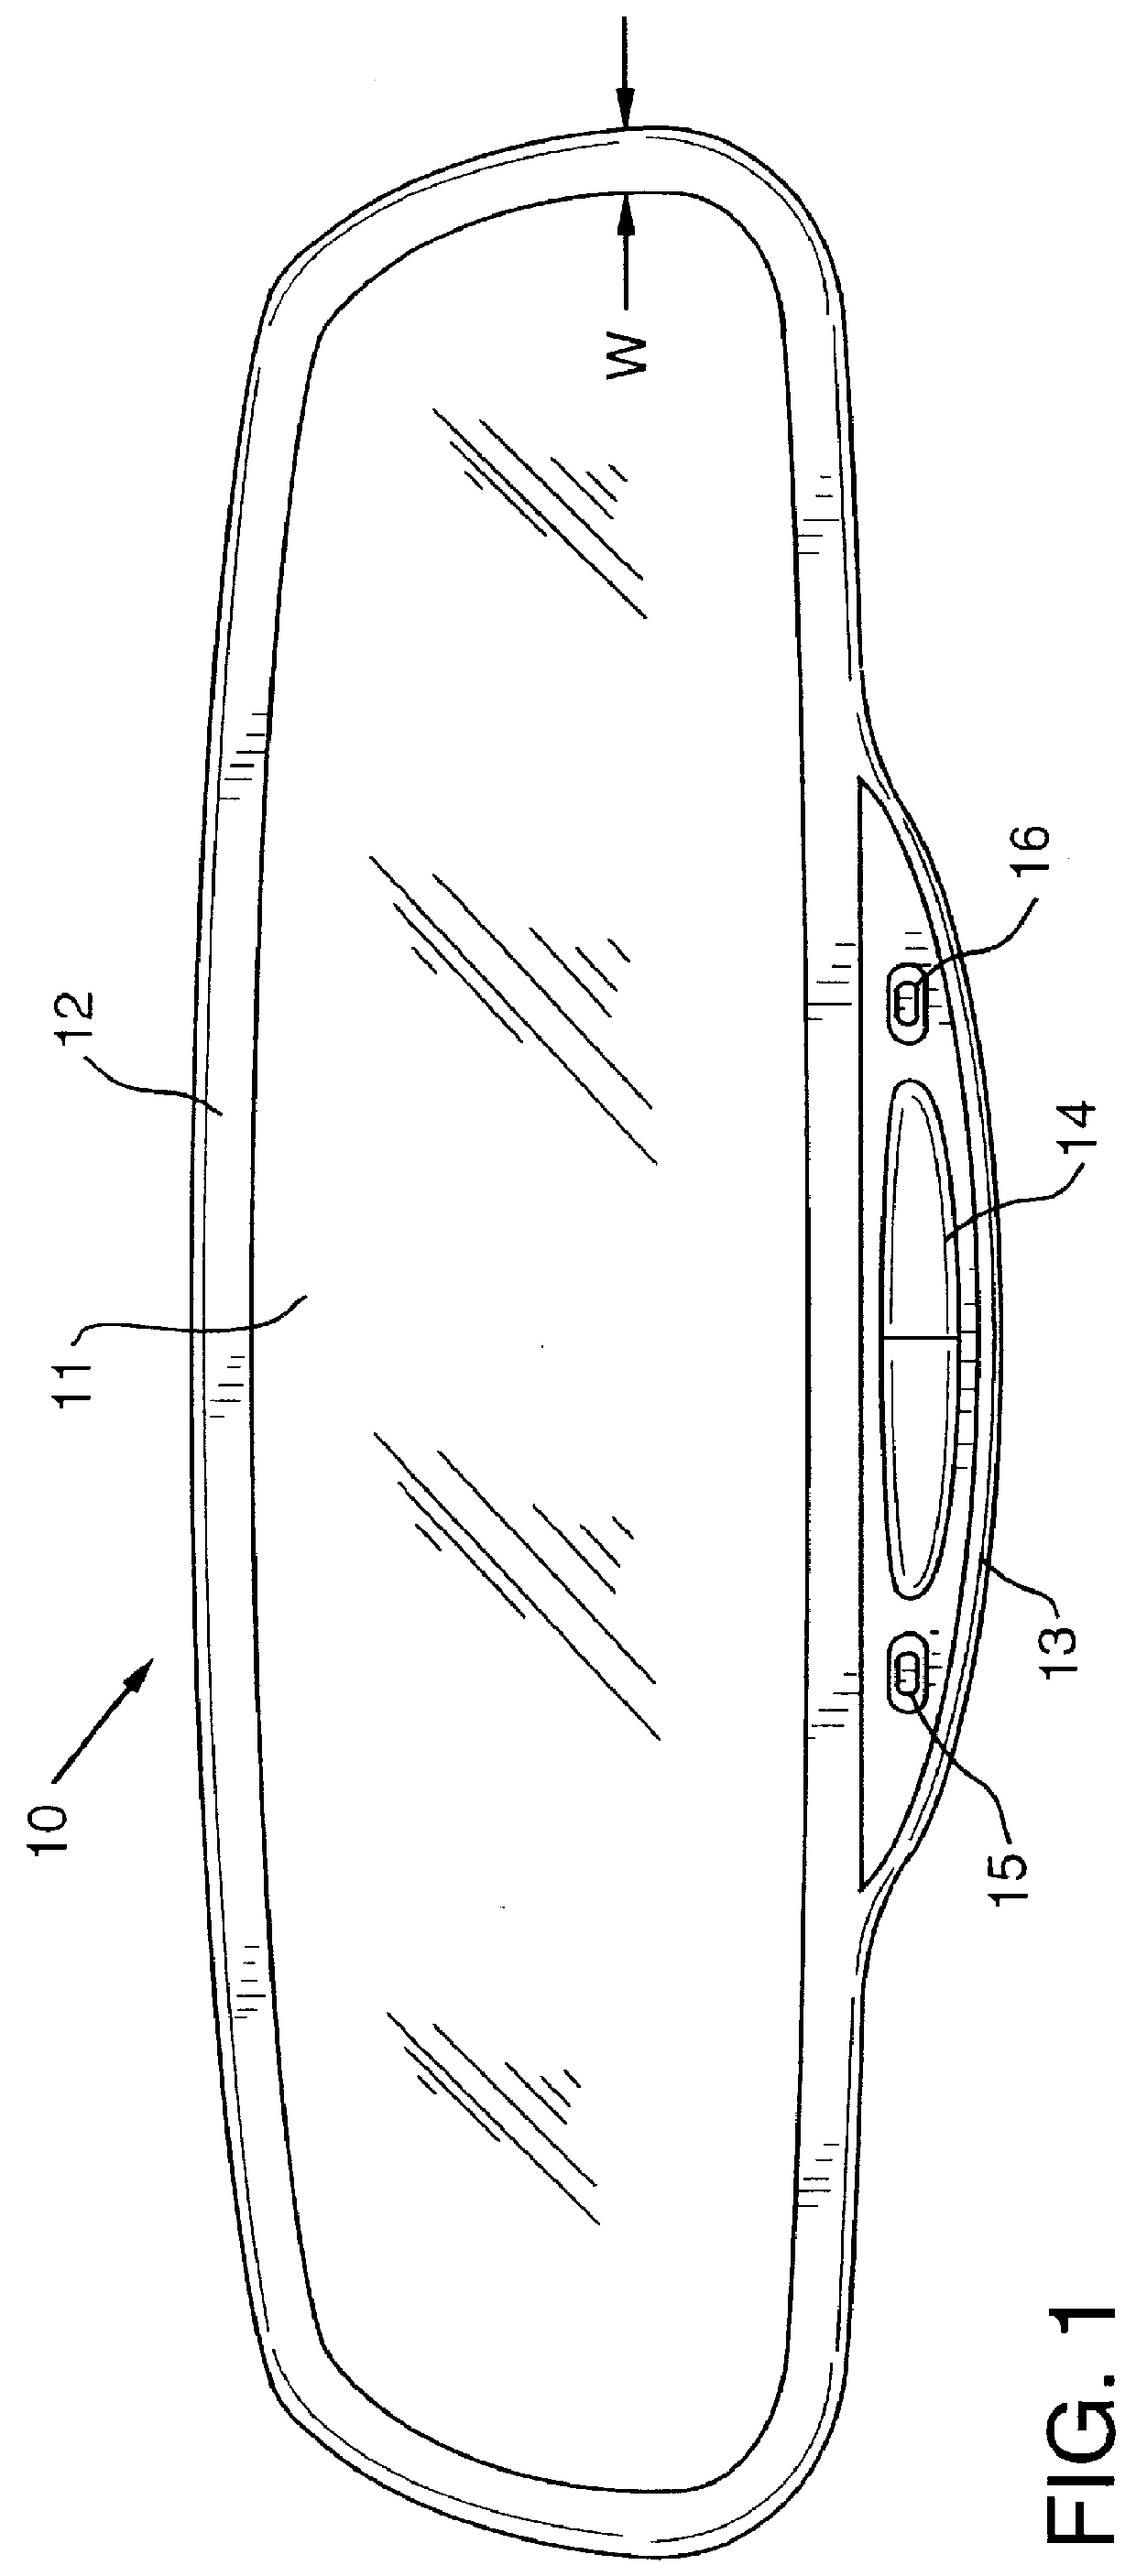 Rearview mirror bezel having reduced apparent size